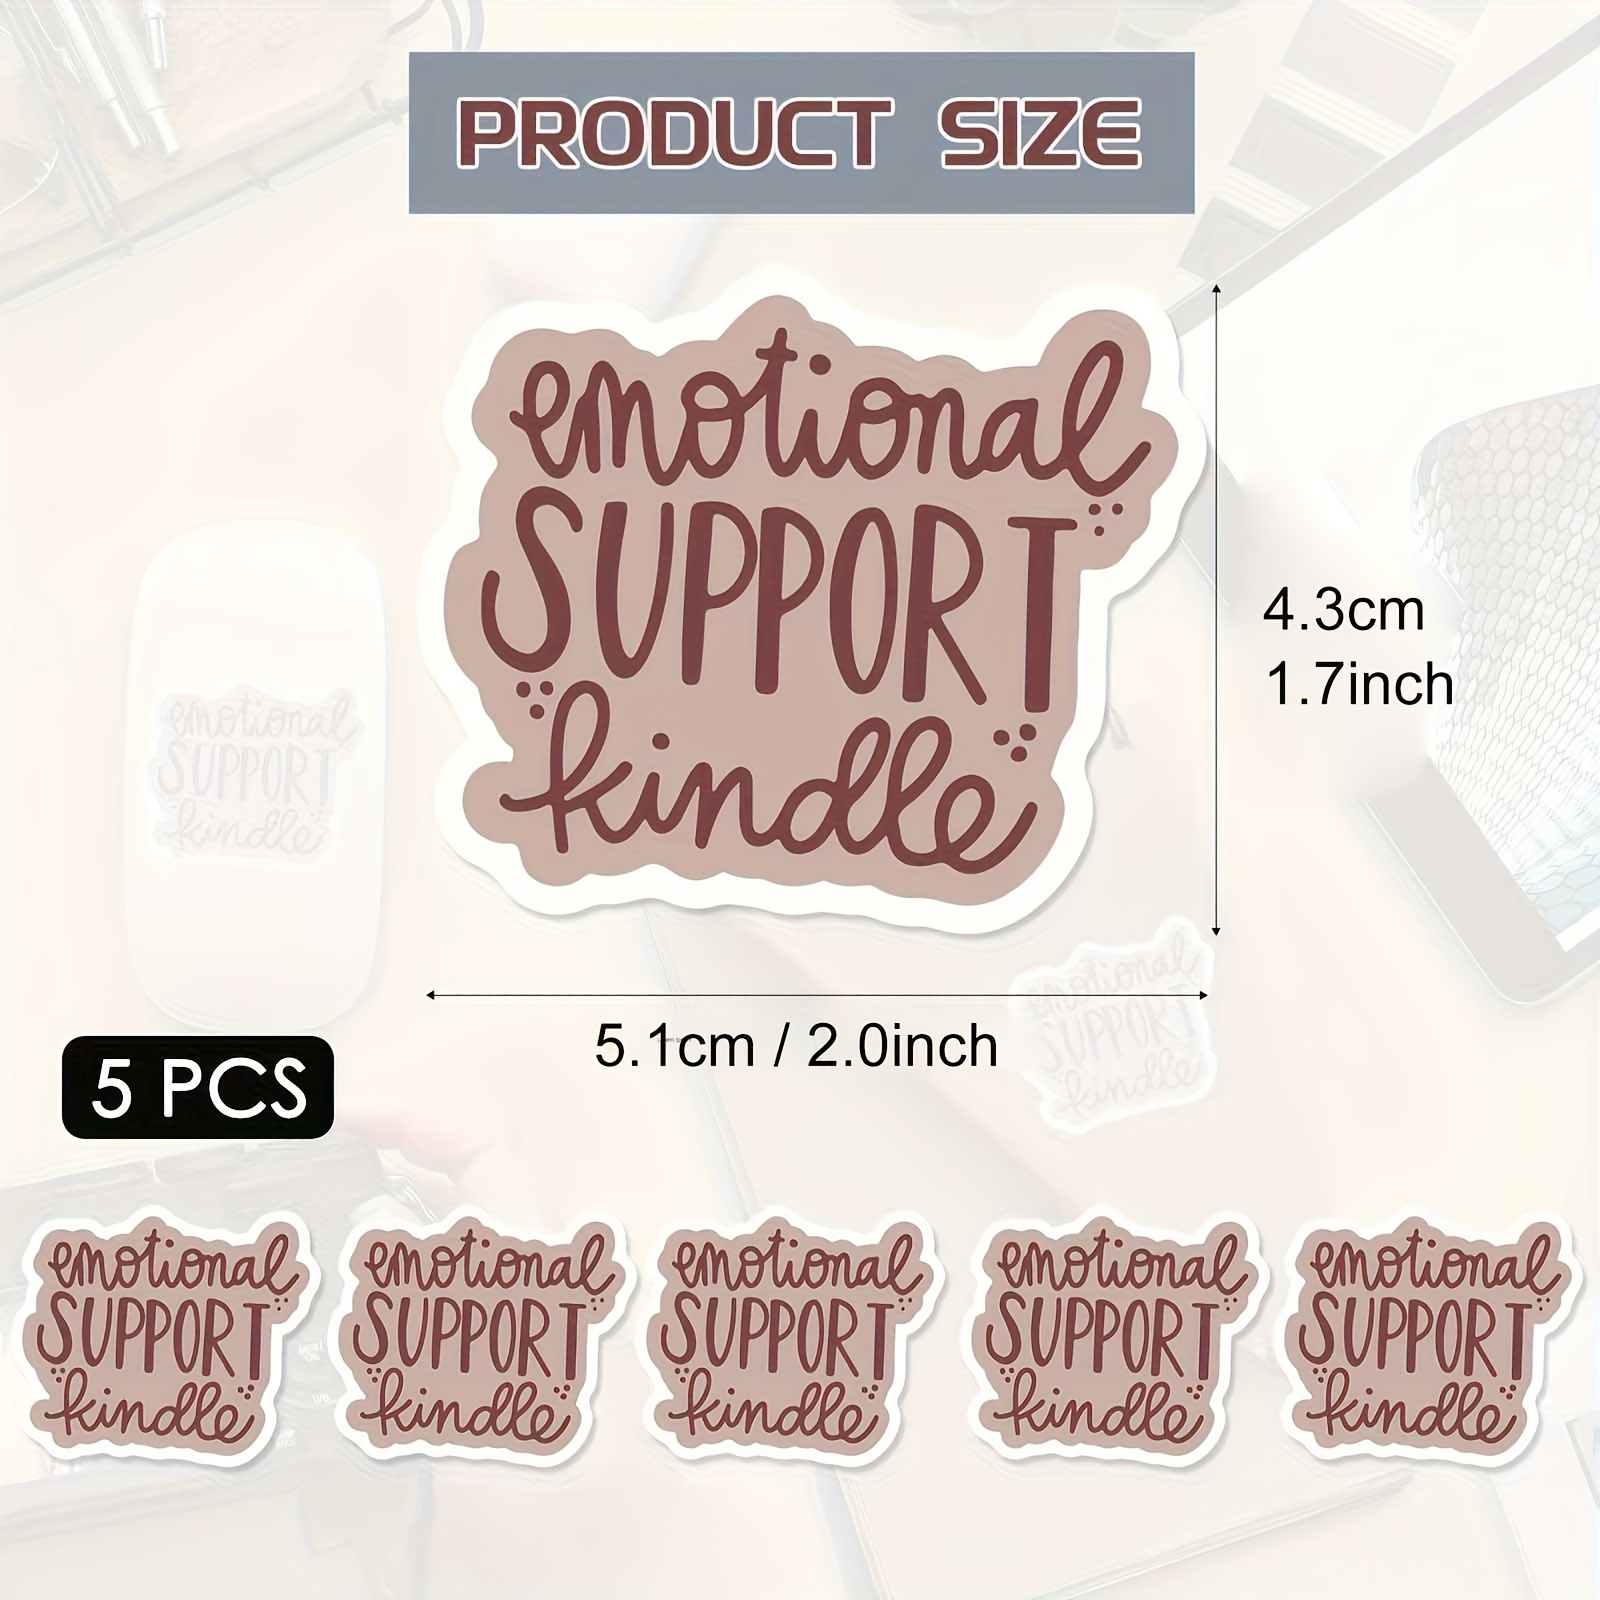 Emotional Support Kindle Sticker, Kindle Sticker, Bookish Gift, Book Lover  Sticker, Book Sticker, Kindle Addict, E-book Sticker, Reading 